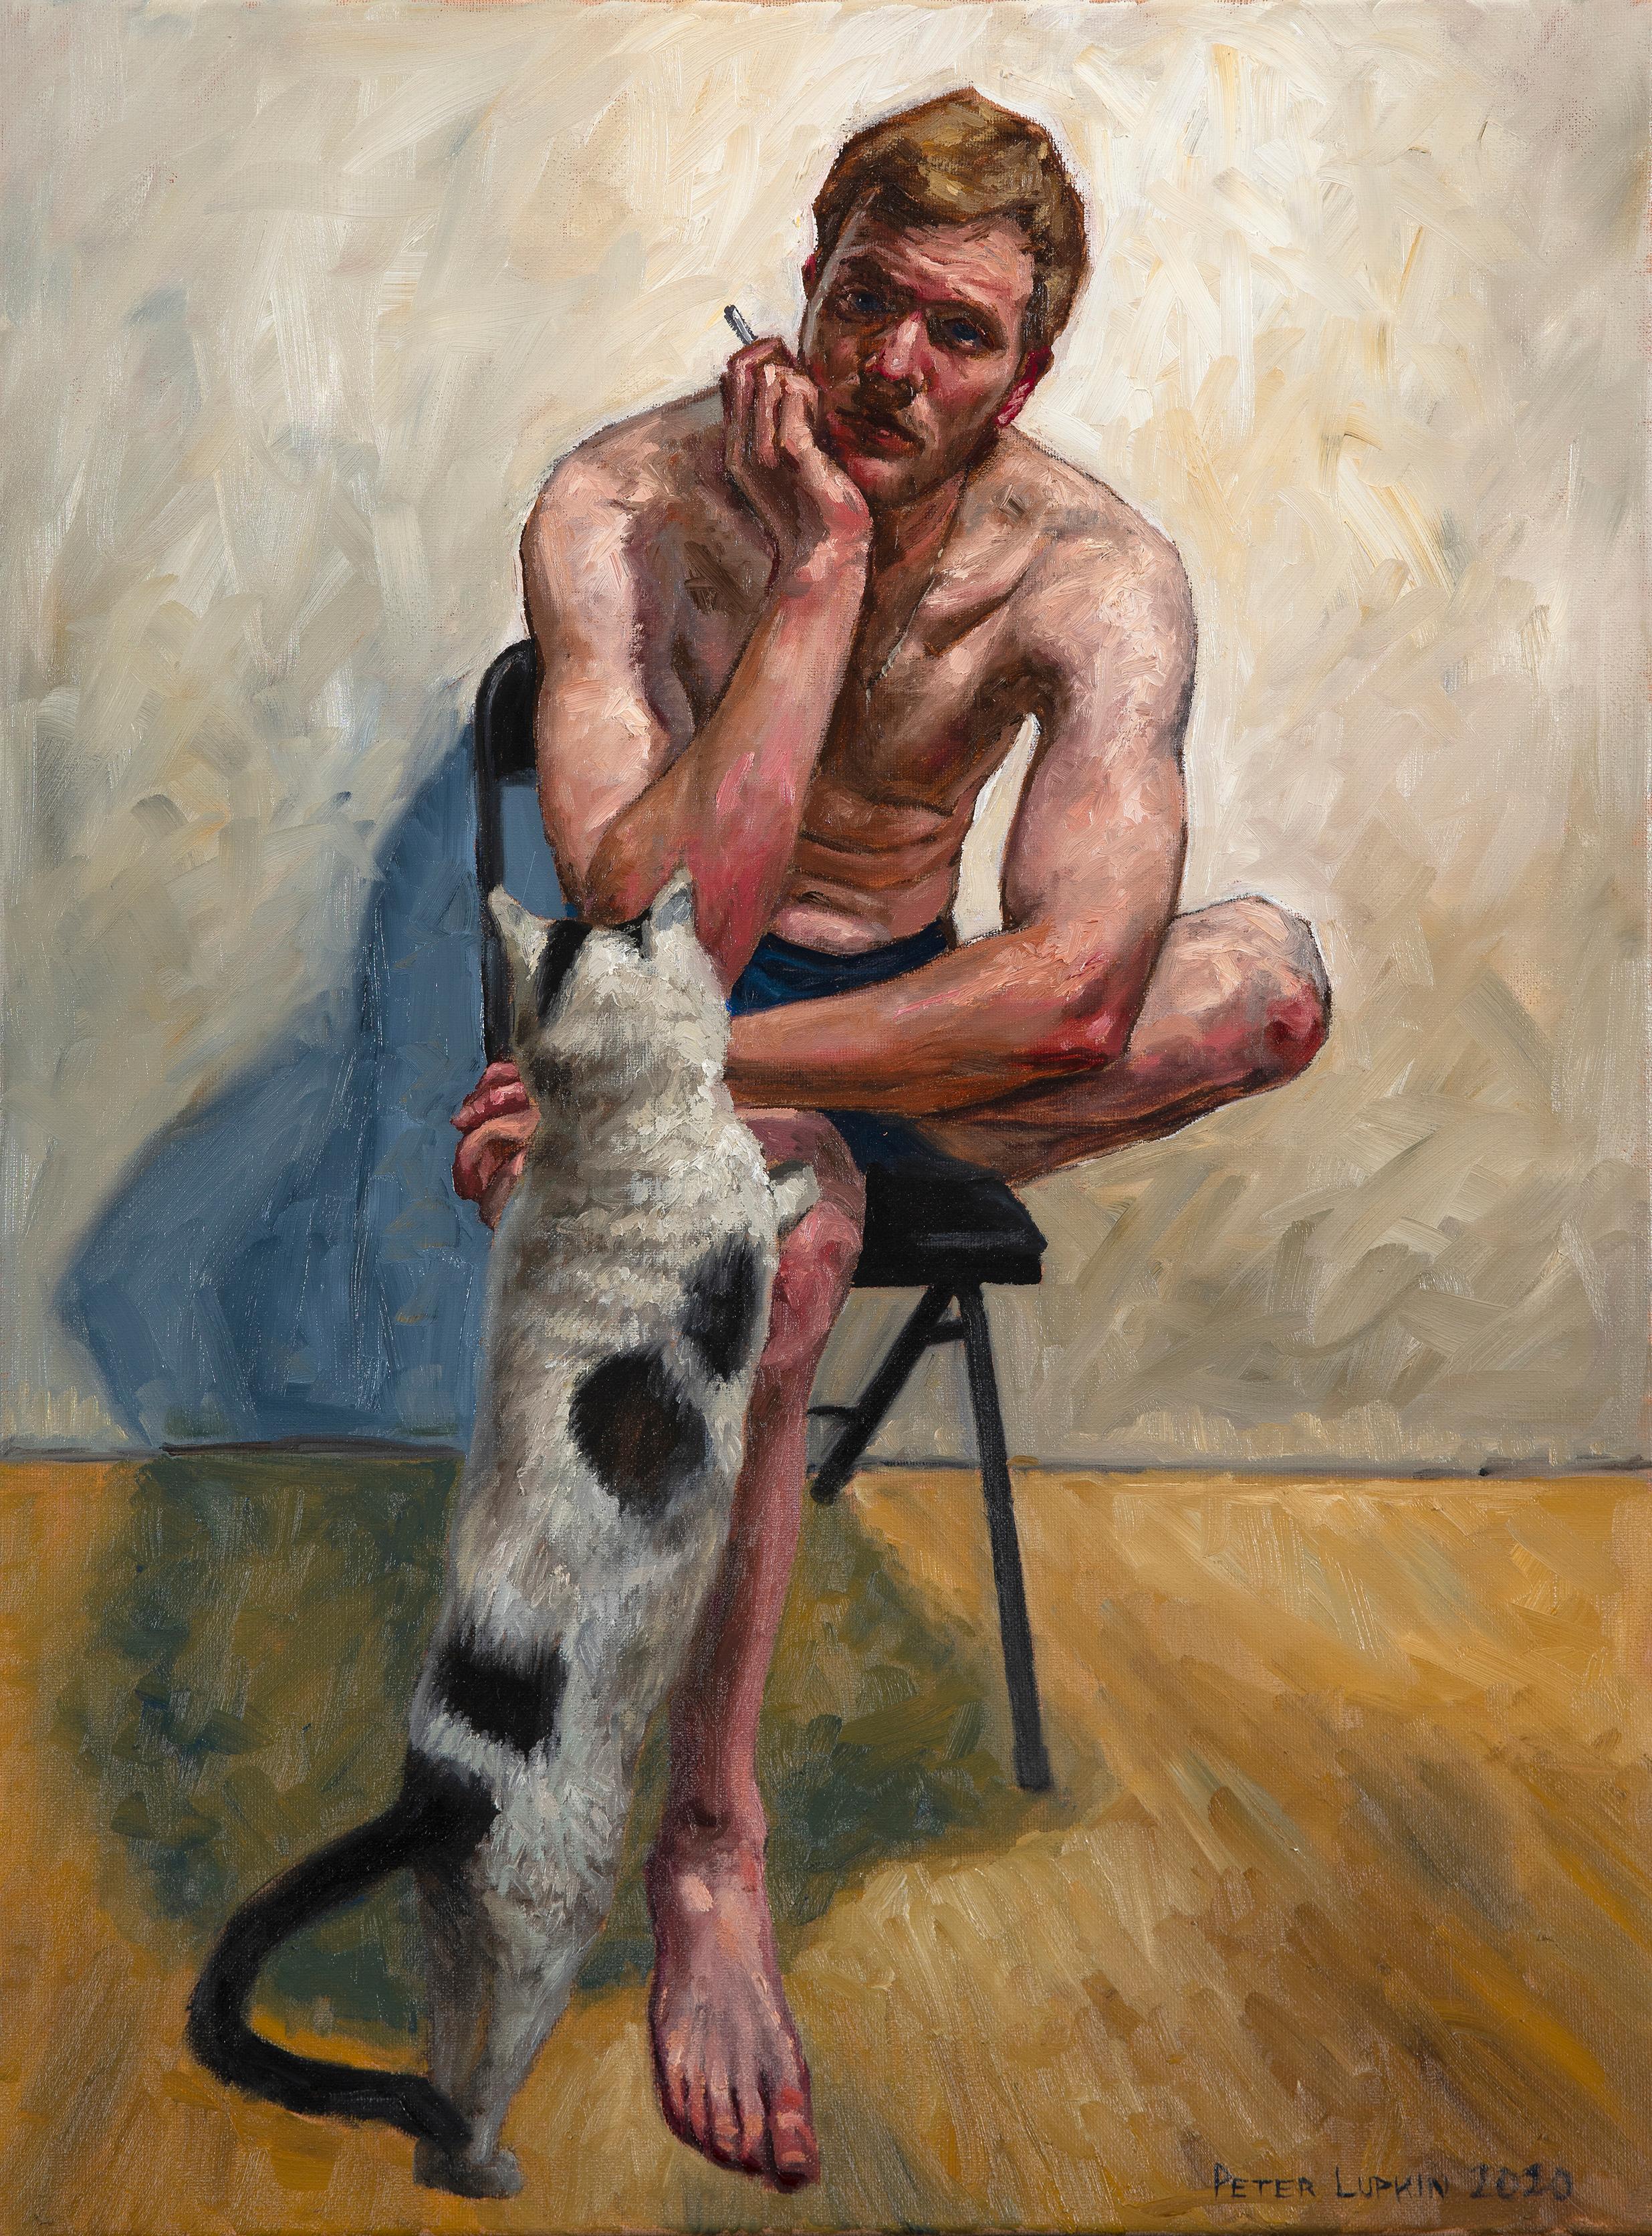 Peter Lupkin Figurative Painting - A Different Self Portrait, Artist in His Studio with Cat, Original Oil Painting